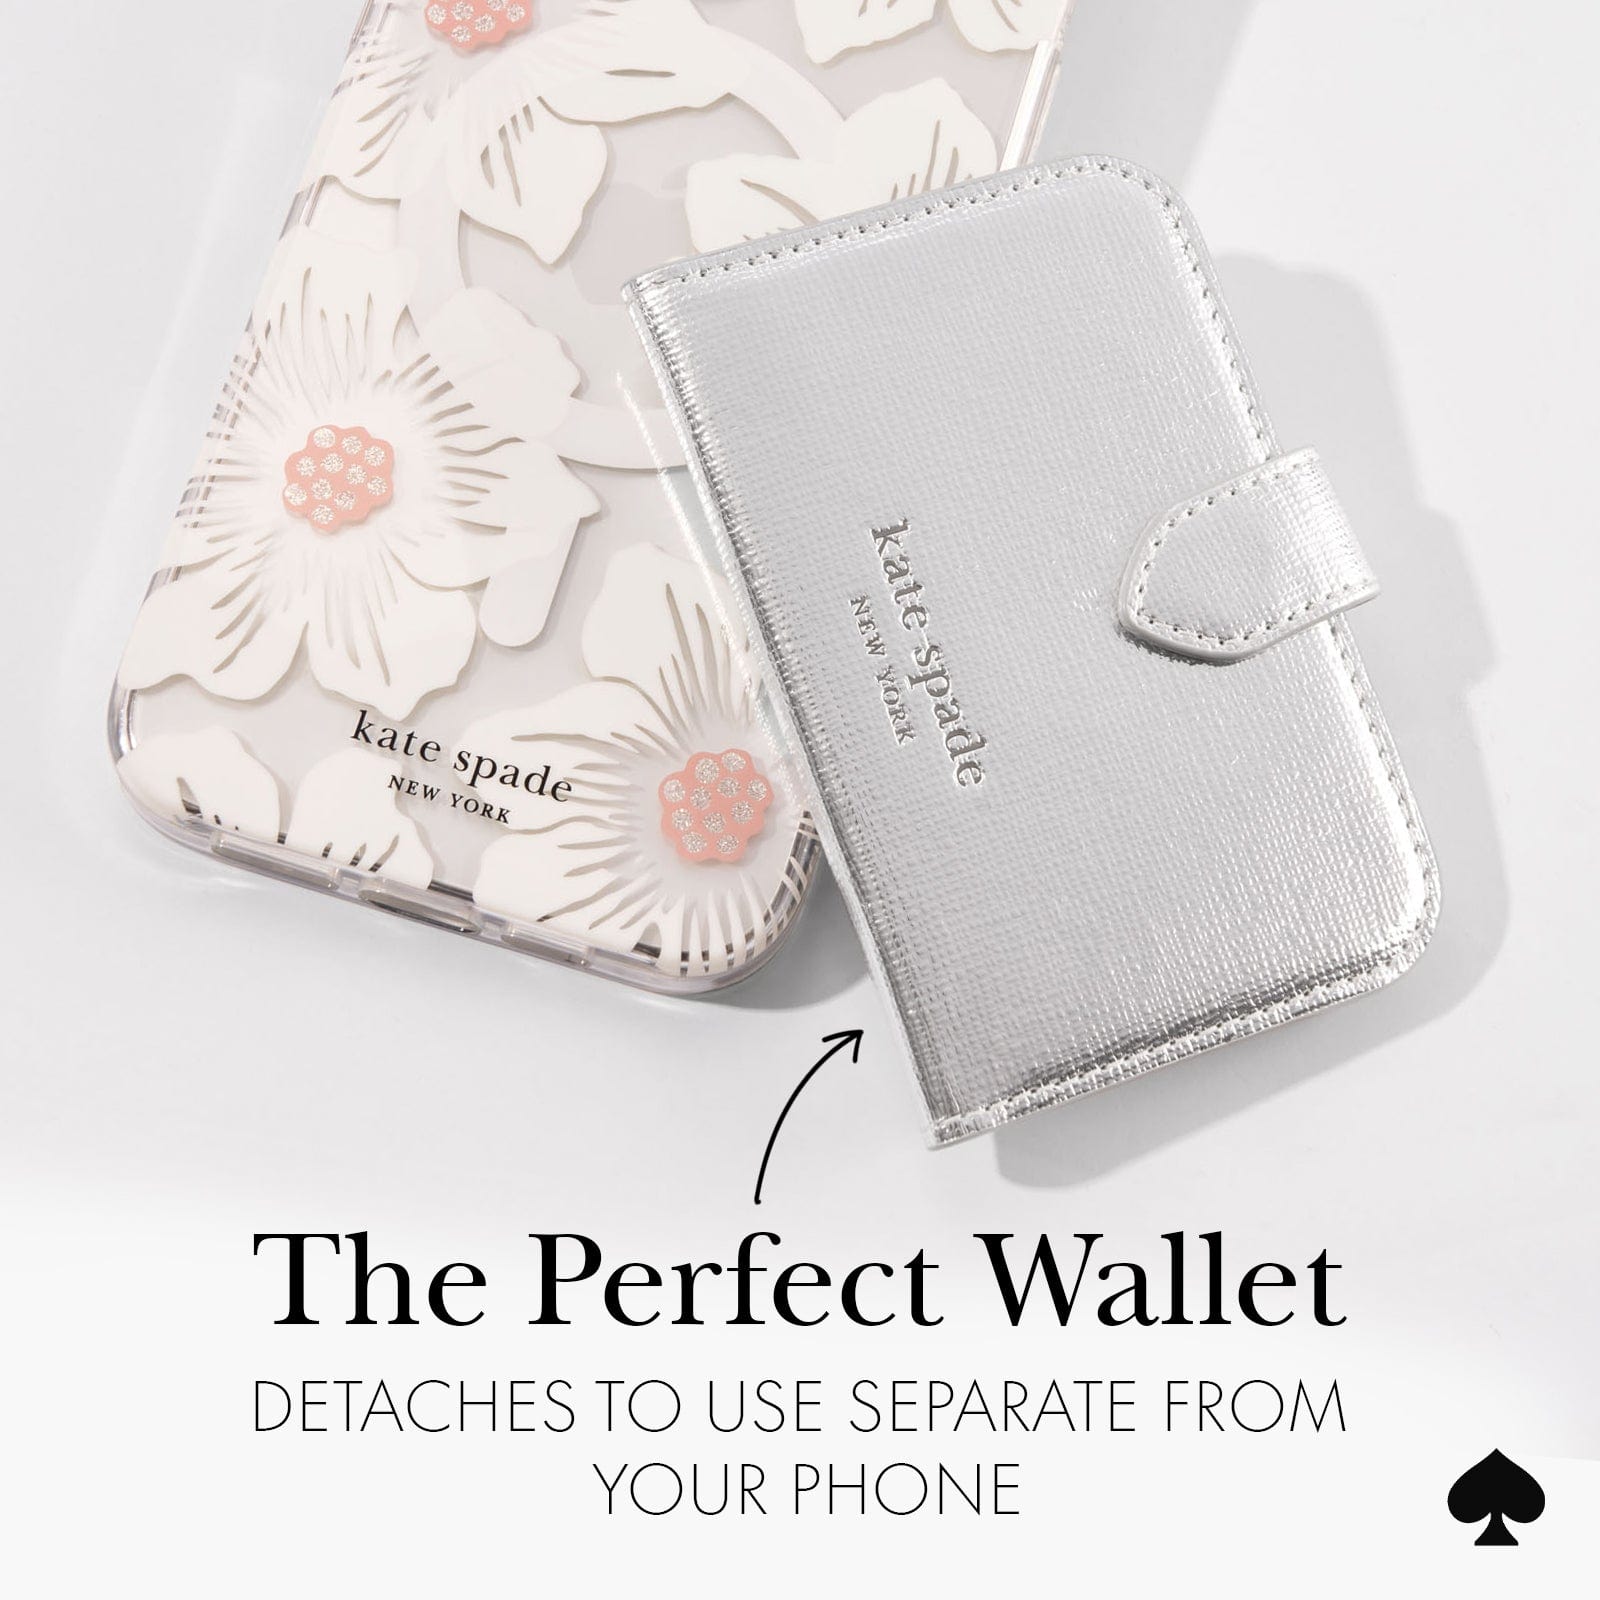 THE PERFECT WALLET DETACHES TO USE SEPARATE FROM YOUR PHONE